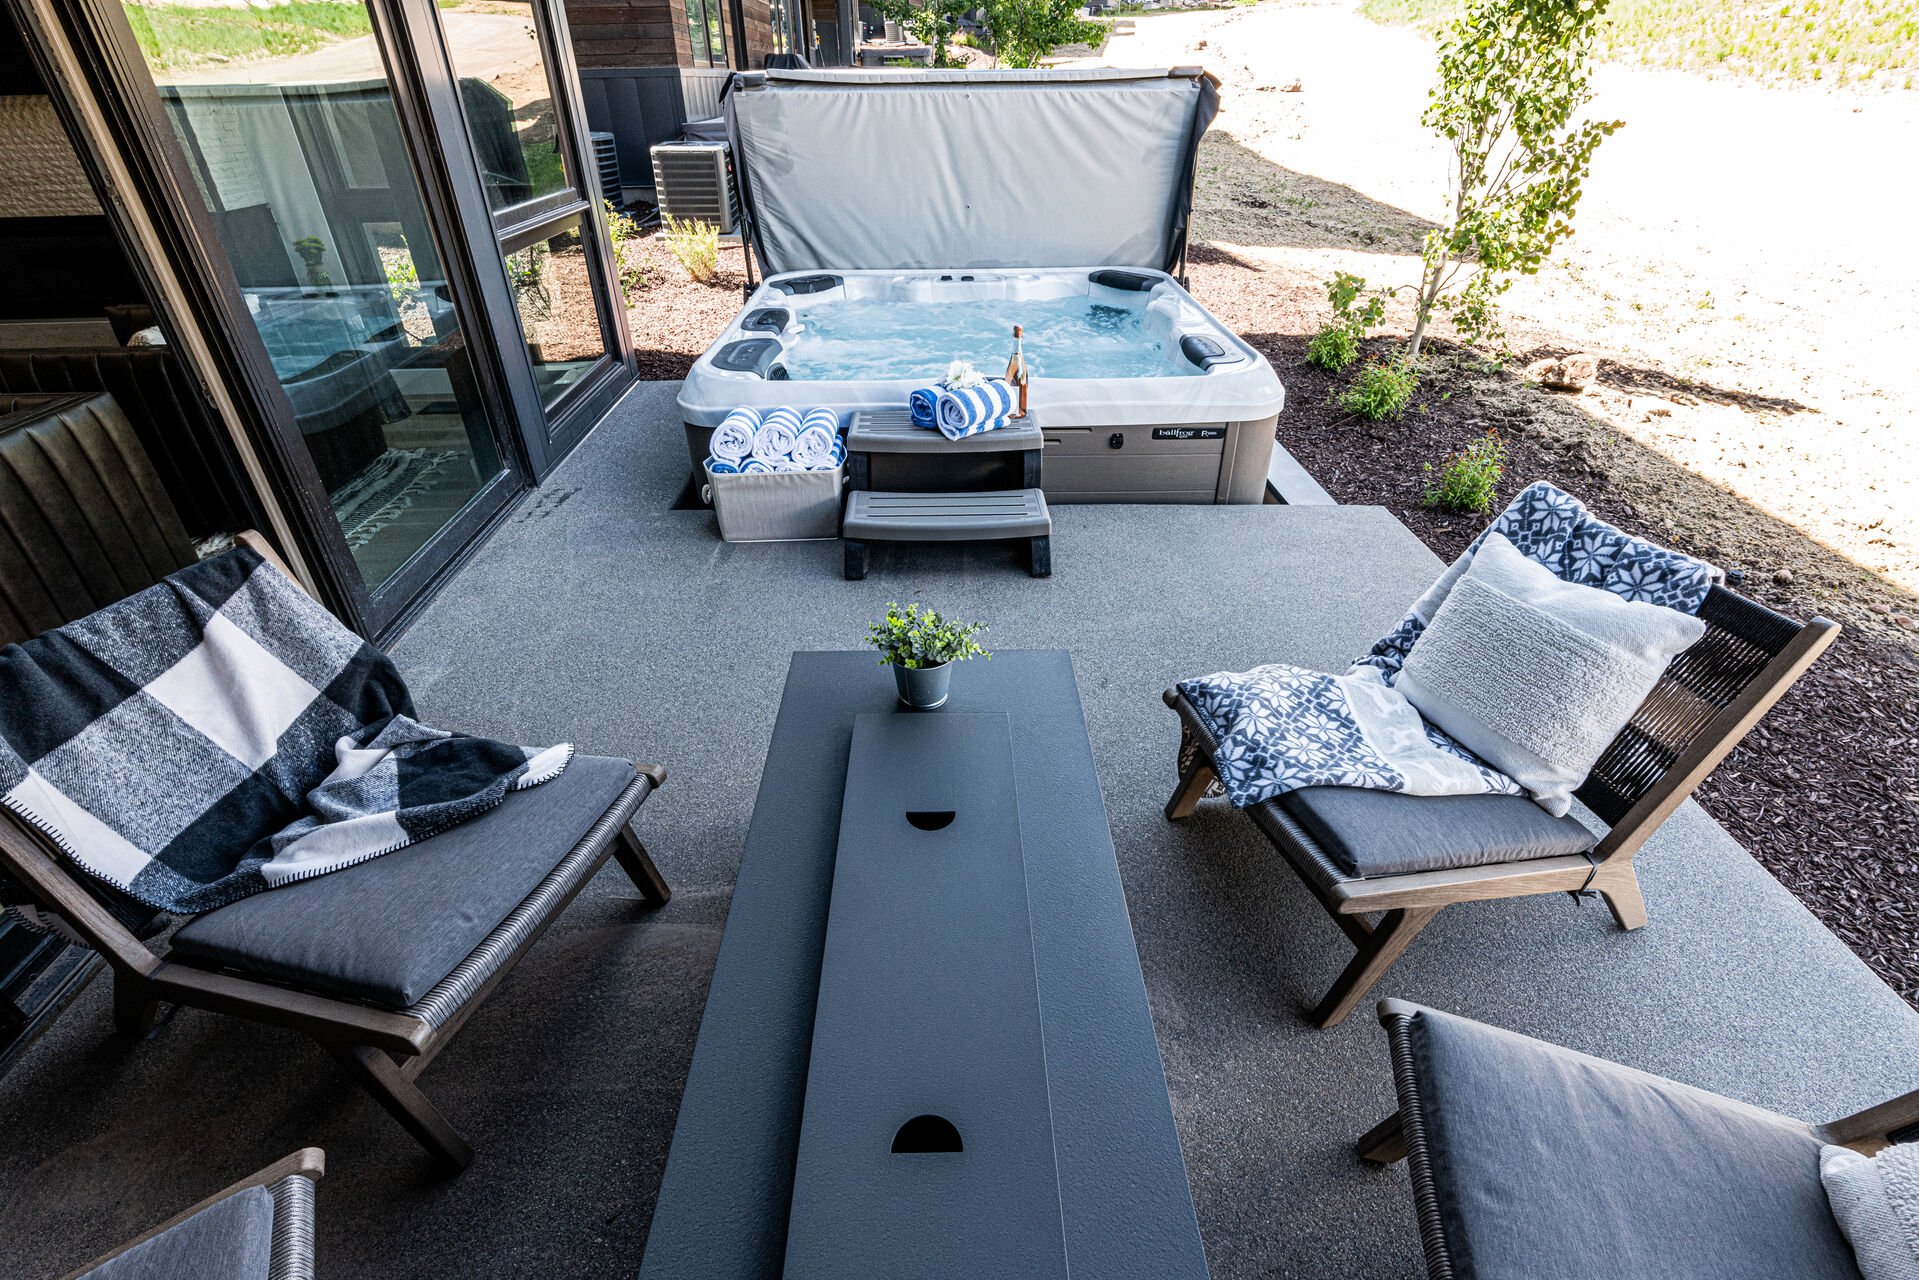 Fire table surrounded by 4 comfortable outdoor chairs